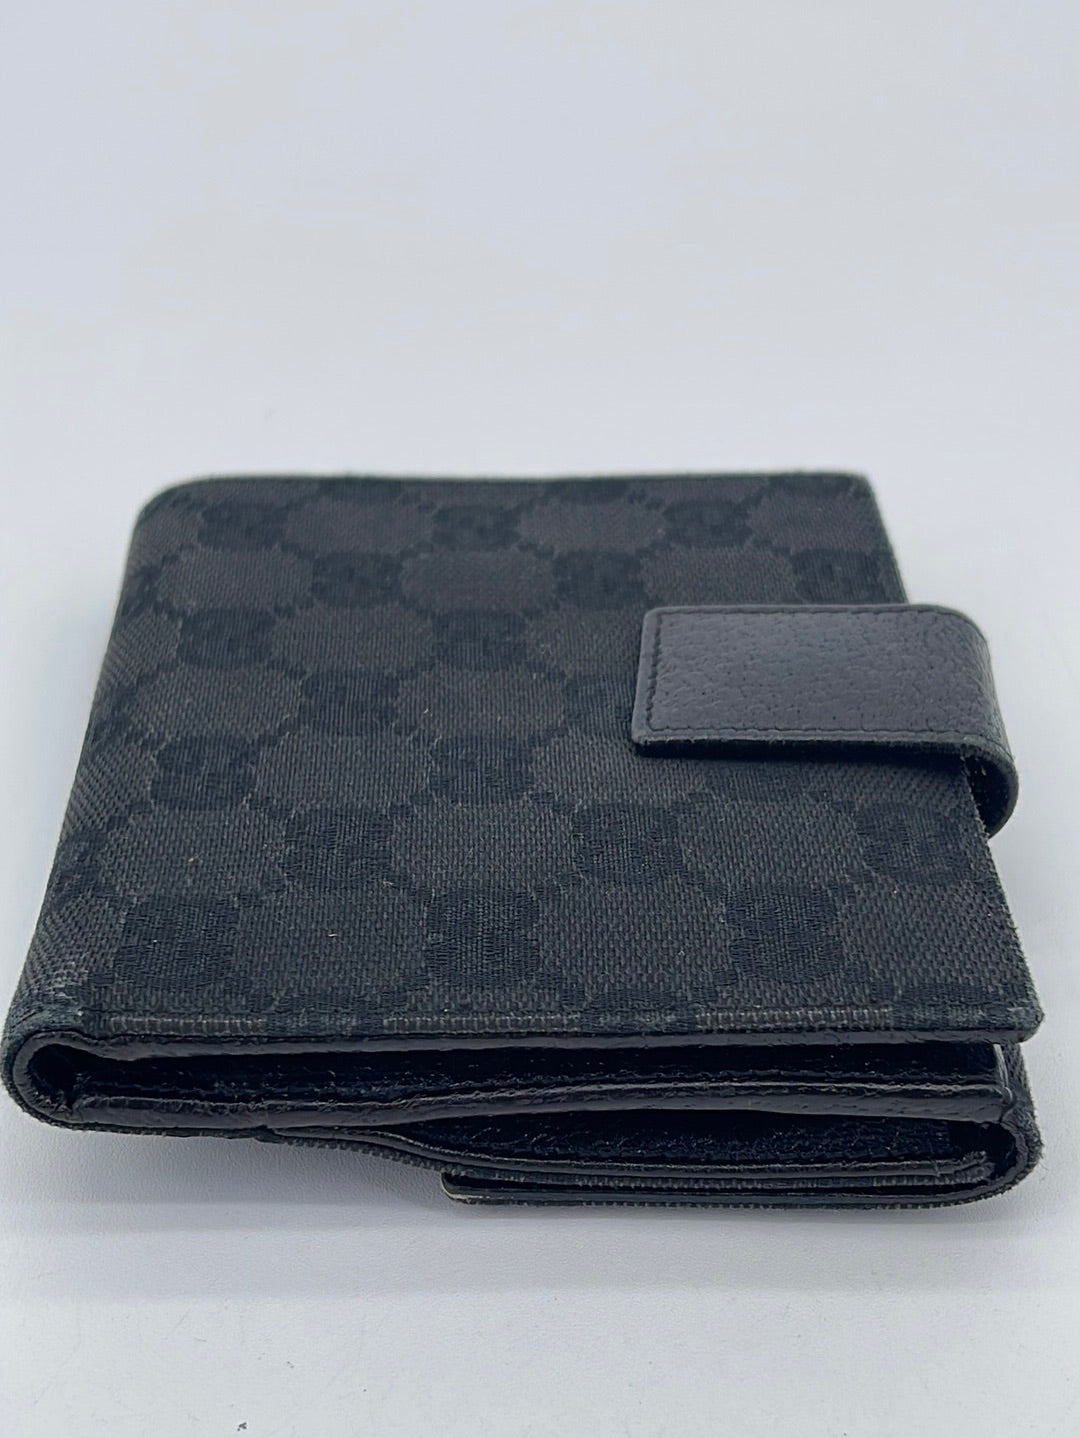 PRELOVED Gucci Black GG Canvas Eclipse Compact Wallet 1209323661 061423